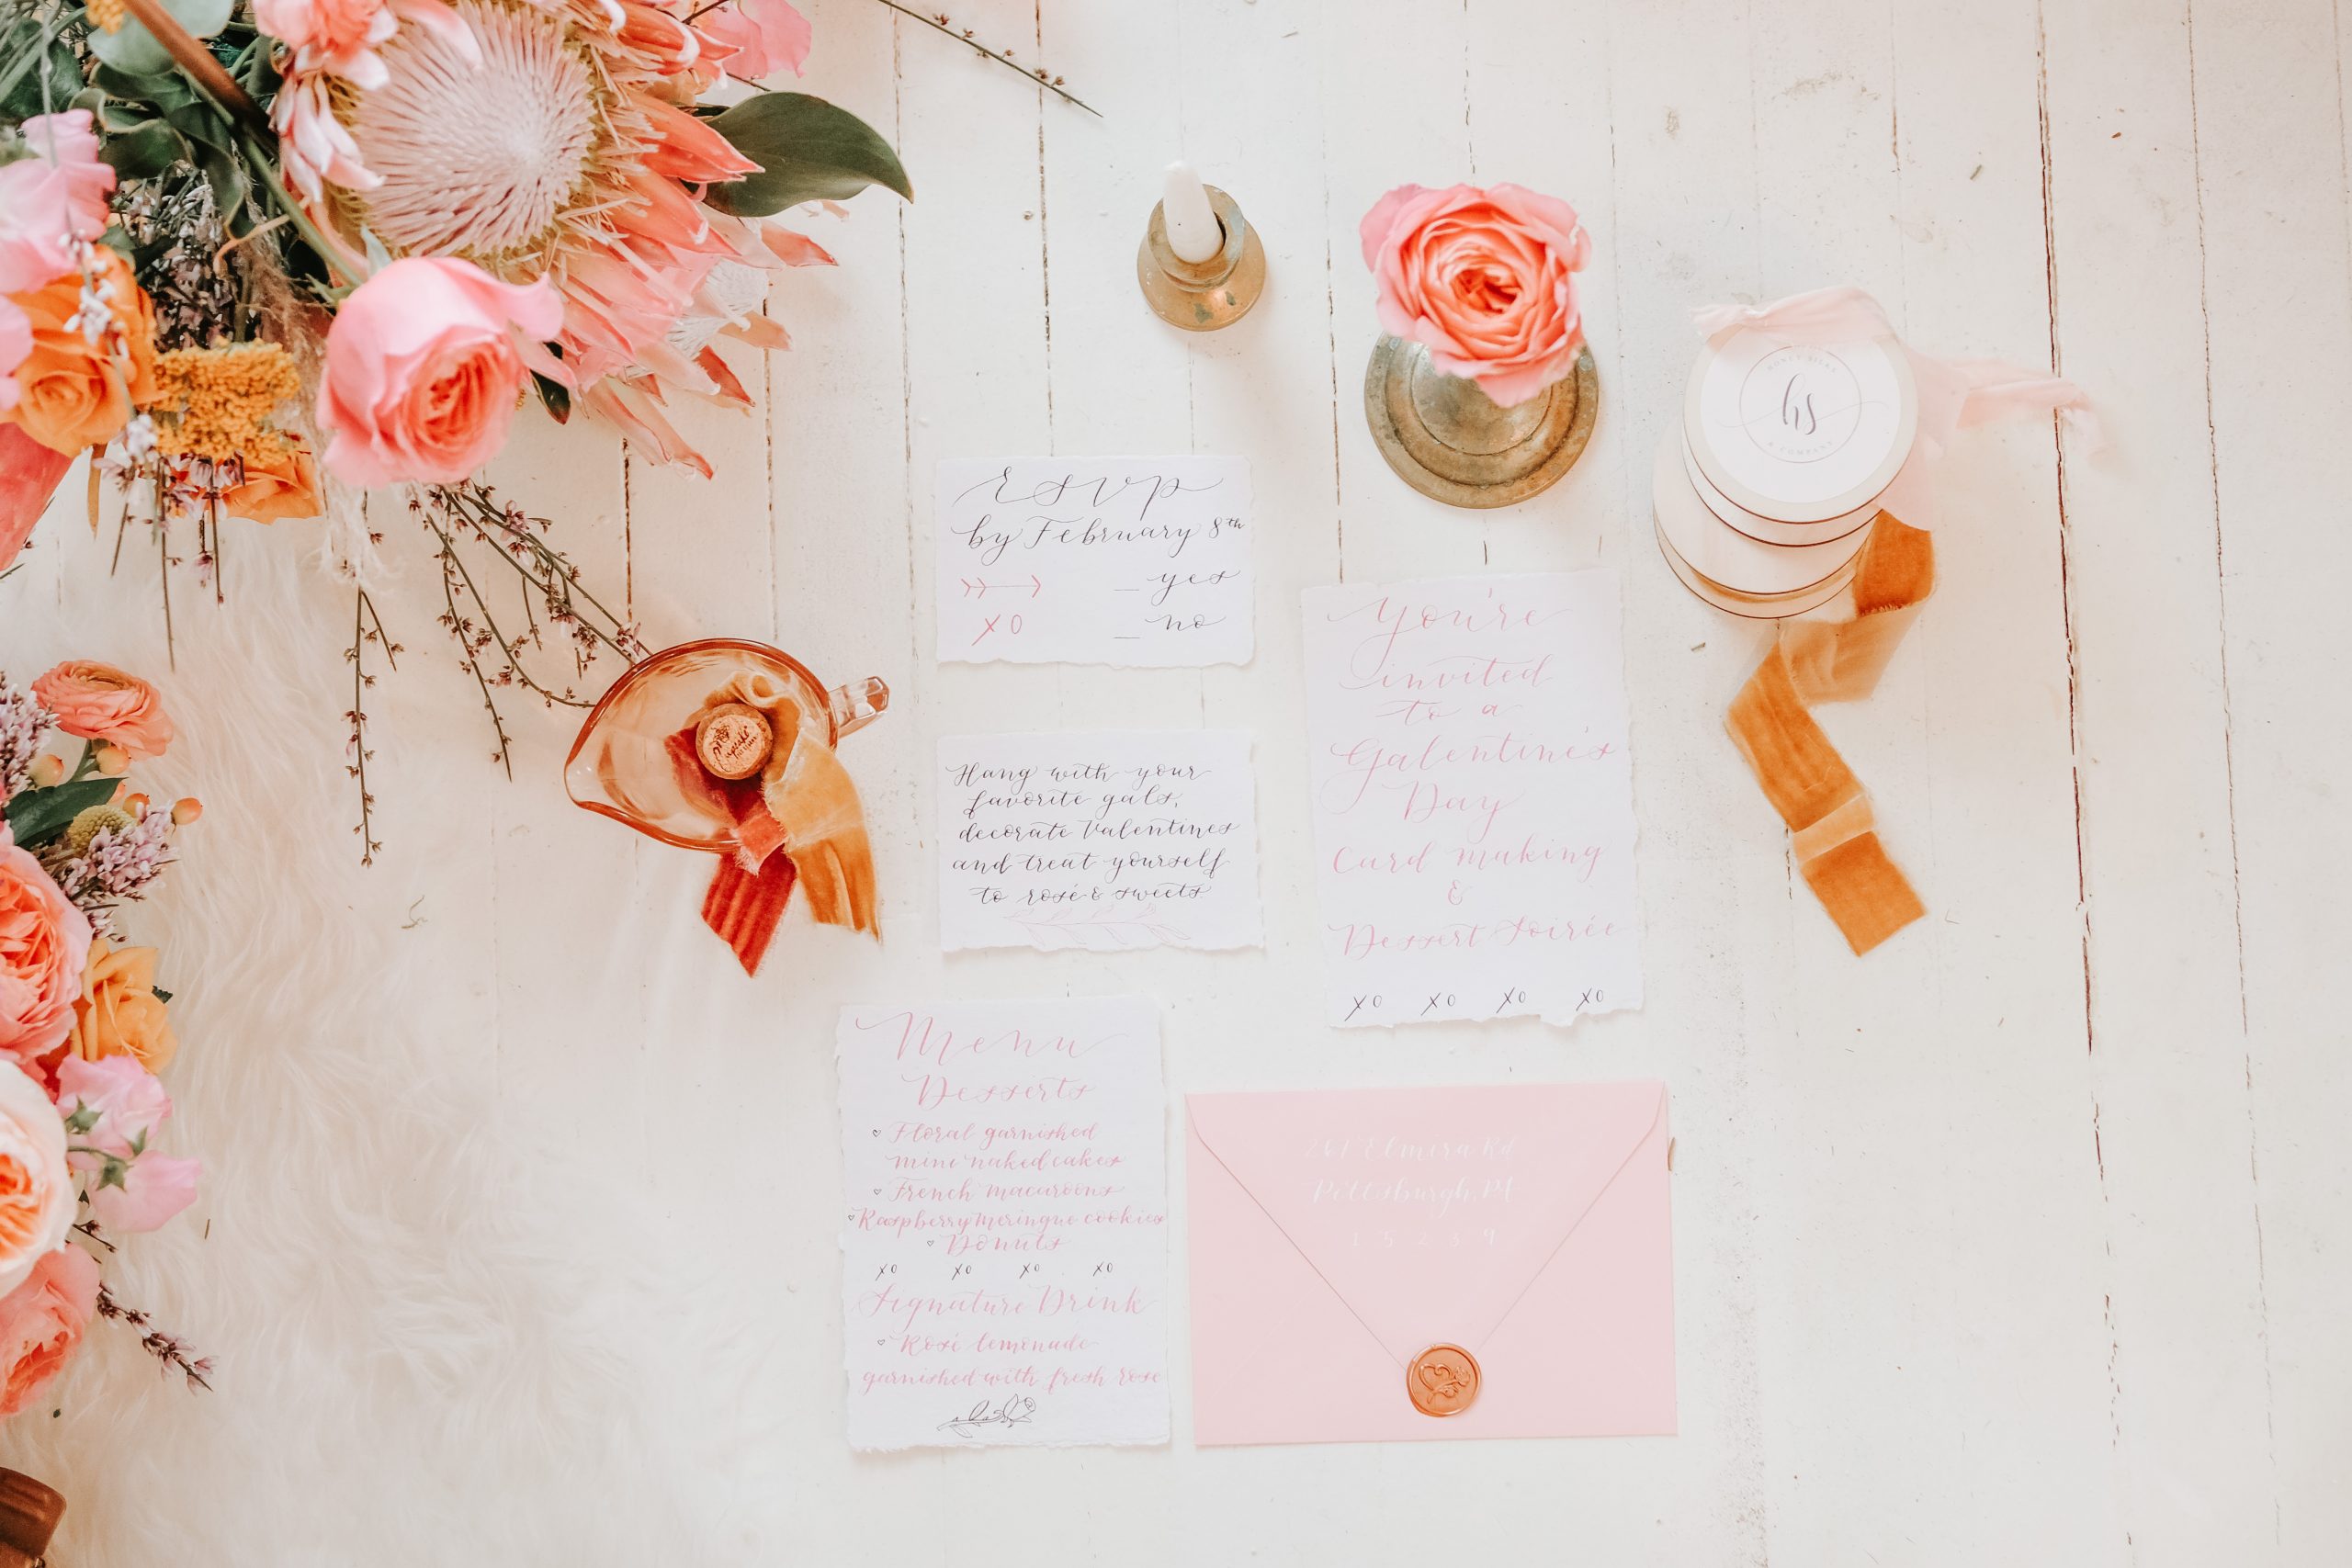 A Romantic, Old World Card Making Galentine's Day Soirée